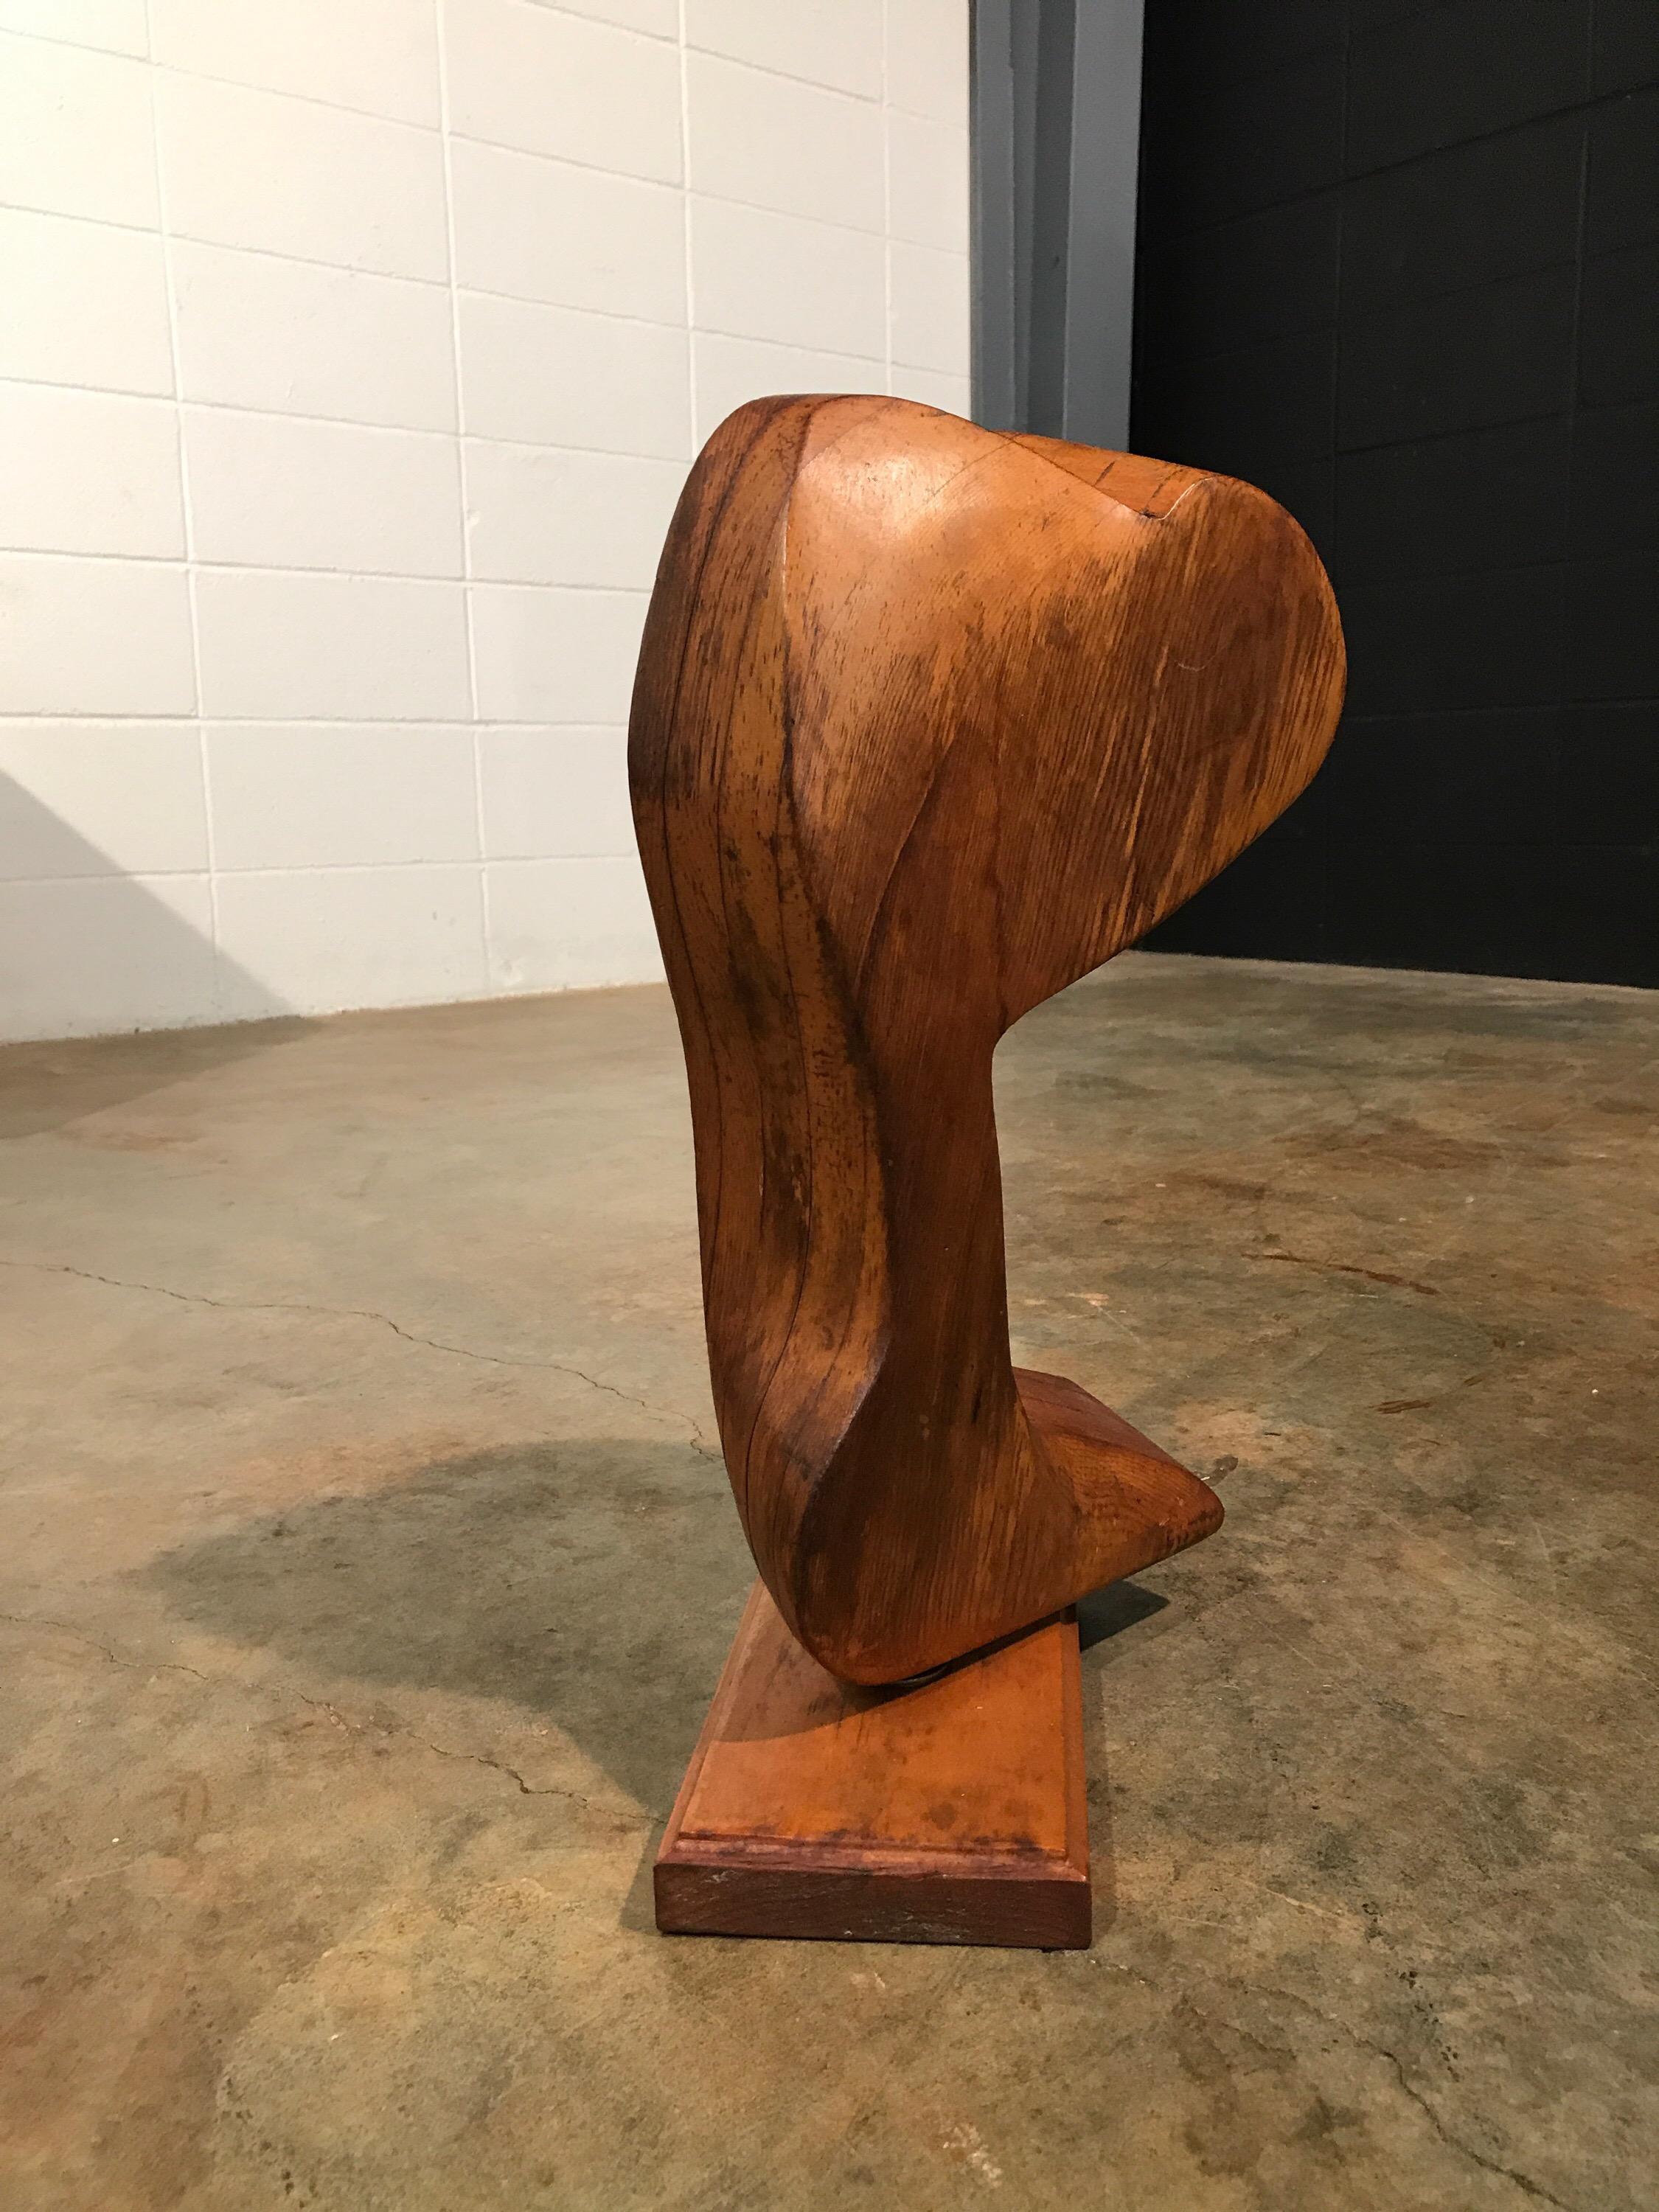 Mid-Century Modern Early Modern Wood Sculpture Artist Signed L Ryan 1951, Rogue Wave, Vintage For Sale